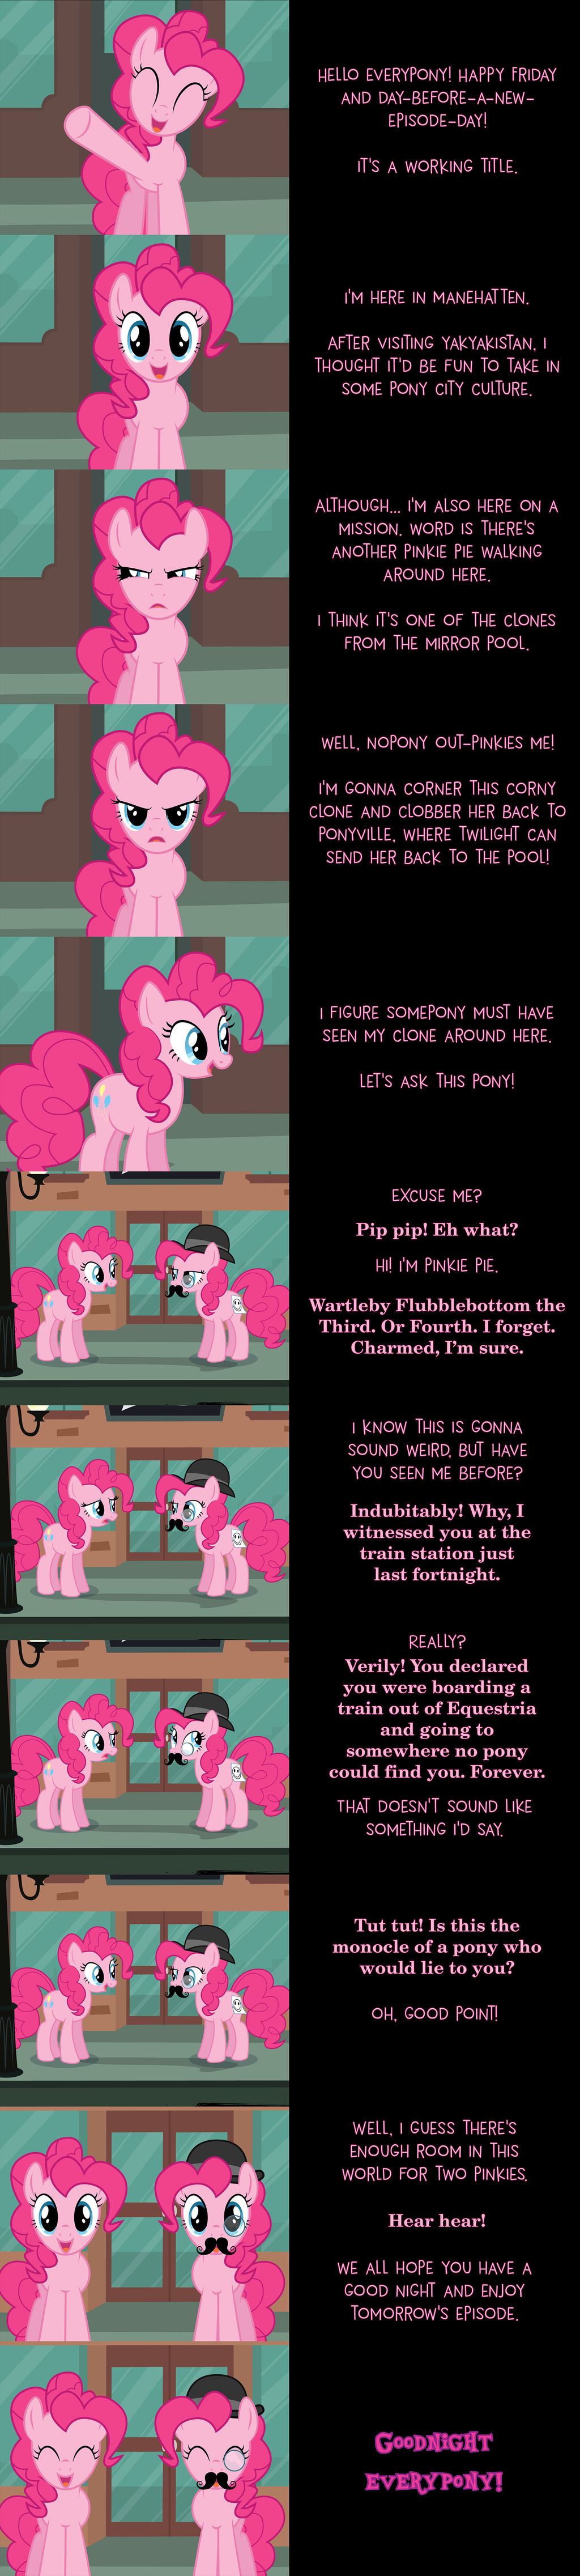 Pinkie Pie Says Goodnight: Double Trouble